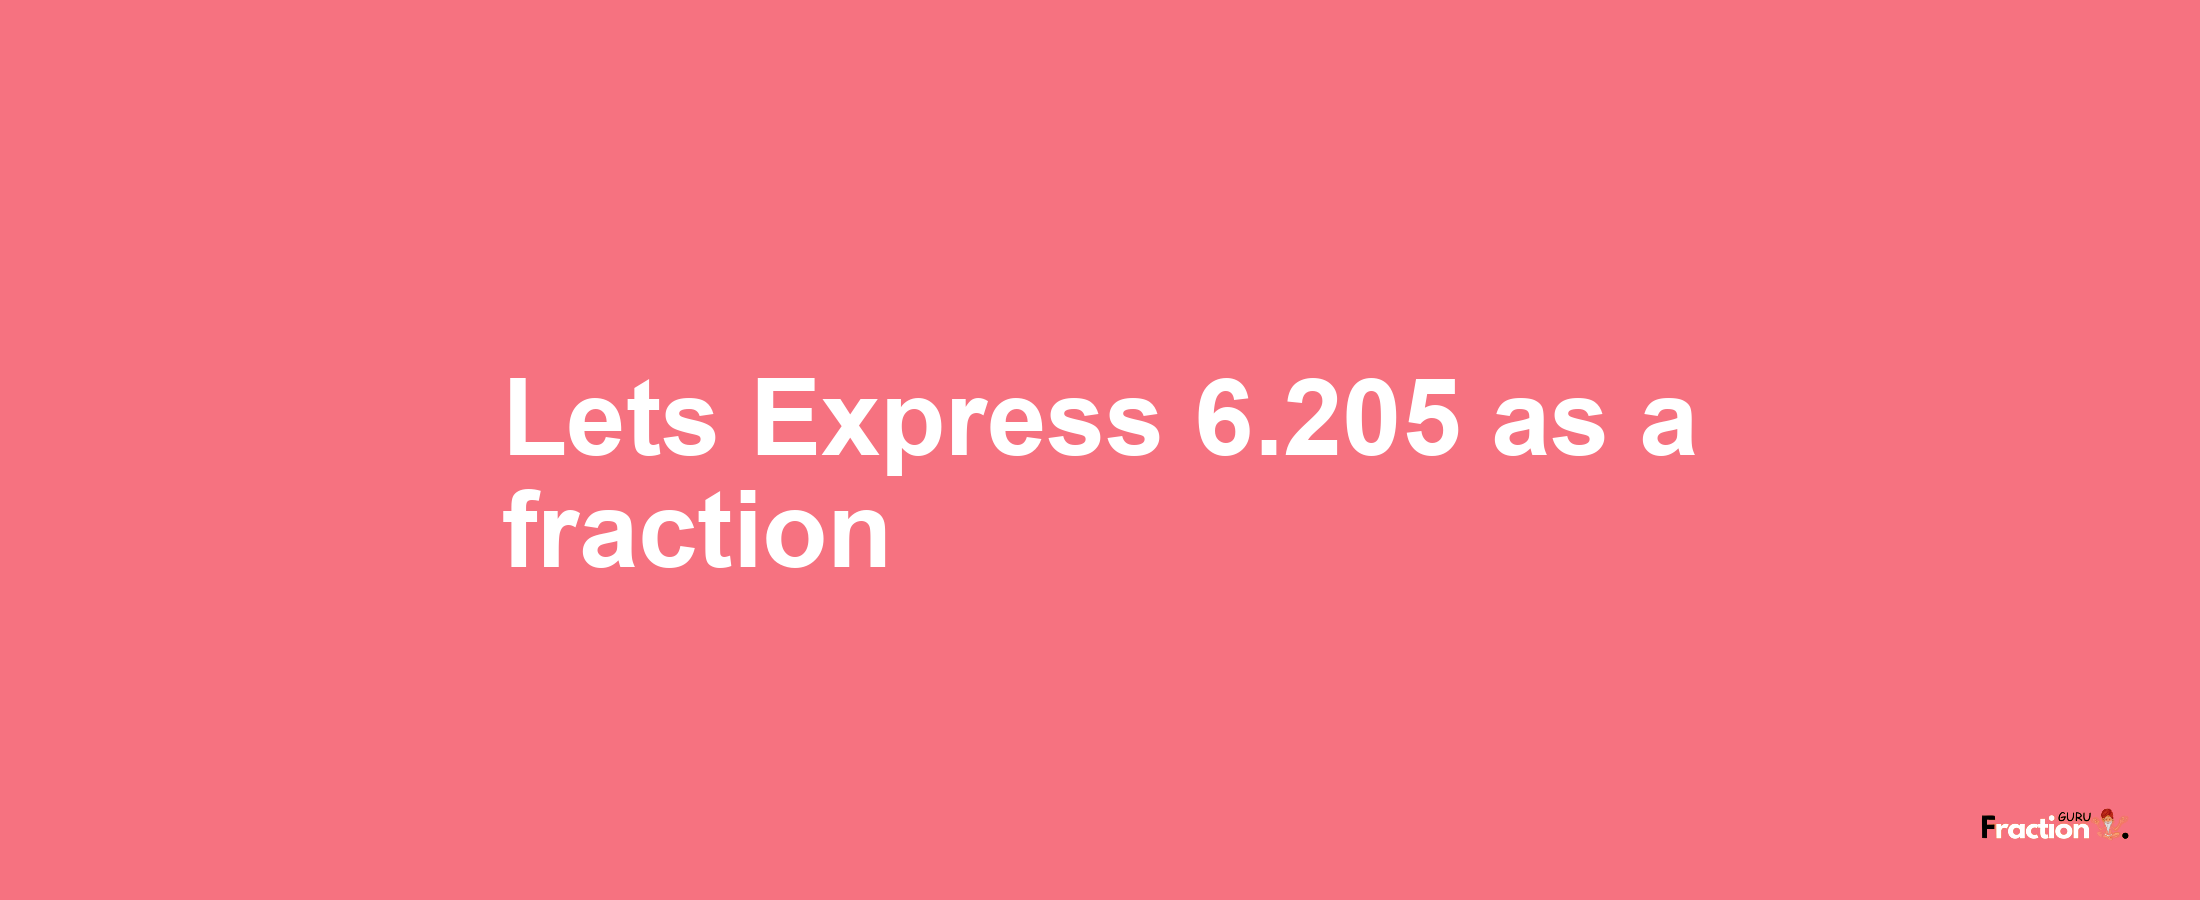 Lets Express 6.205 as afraction